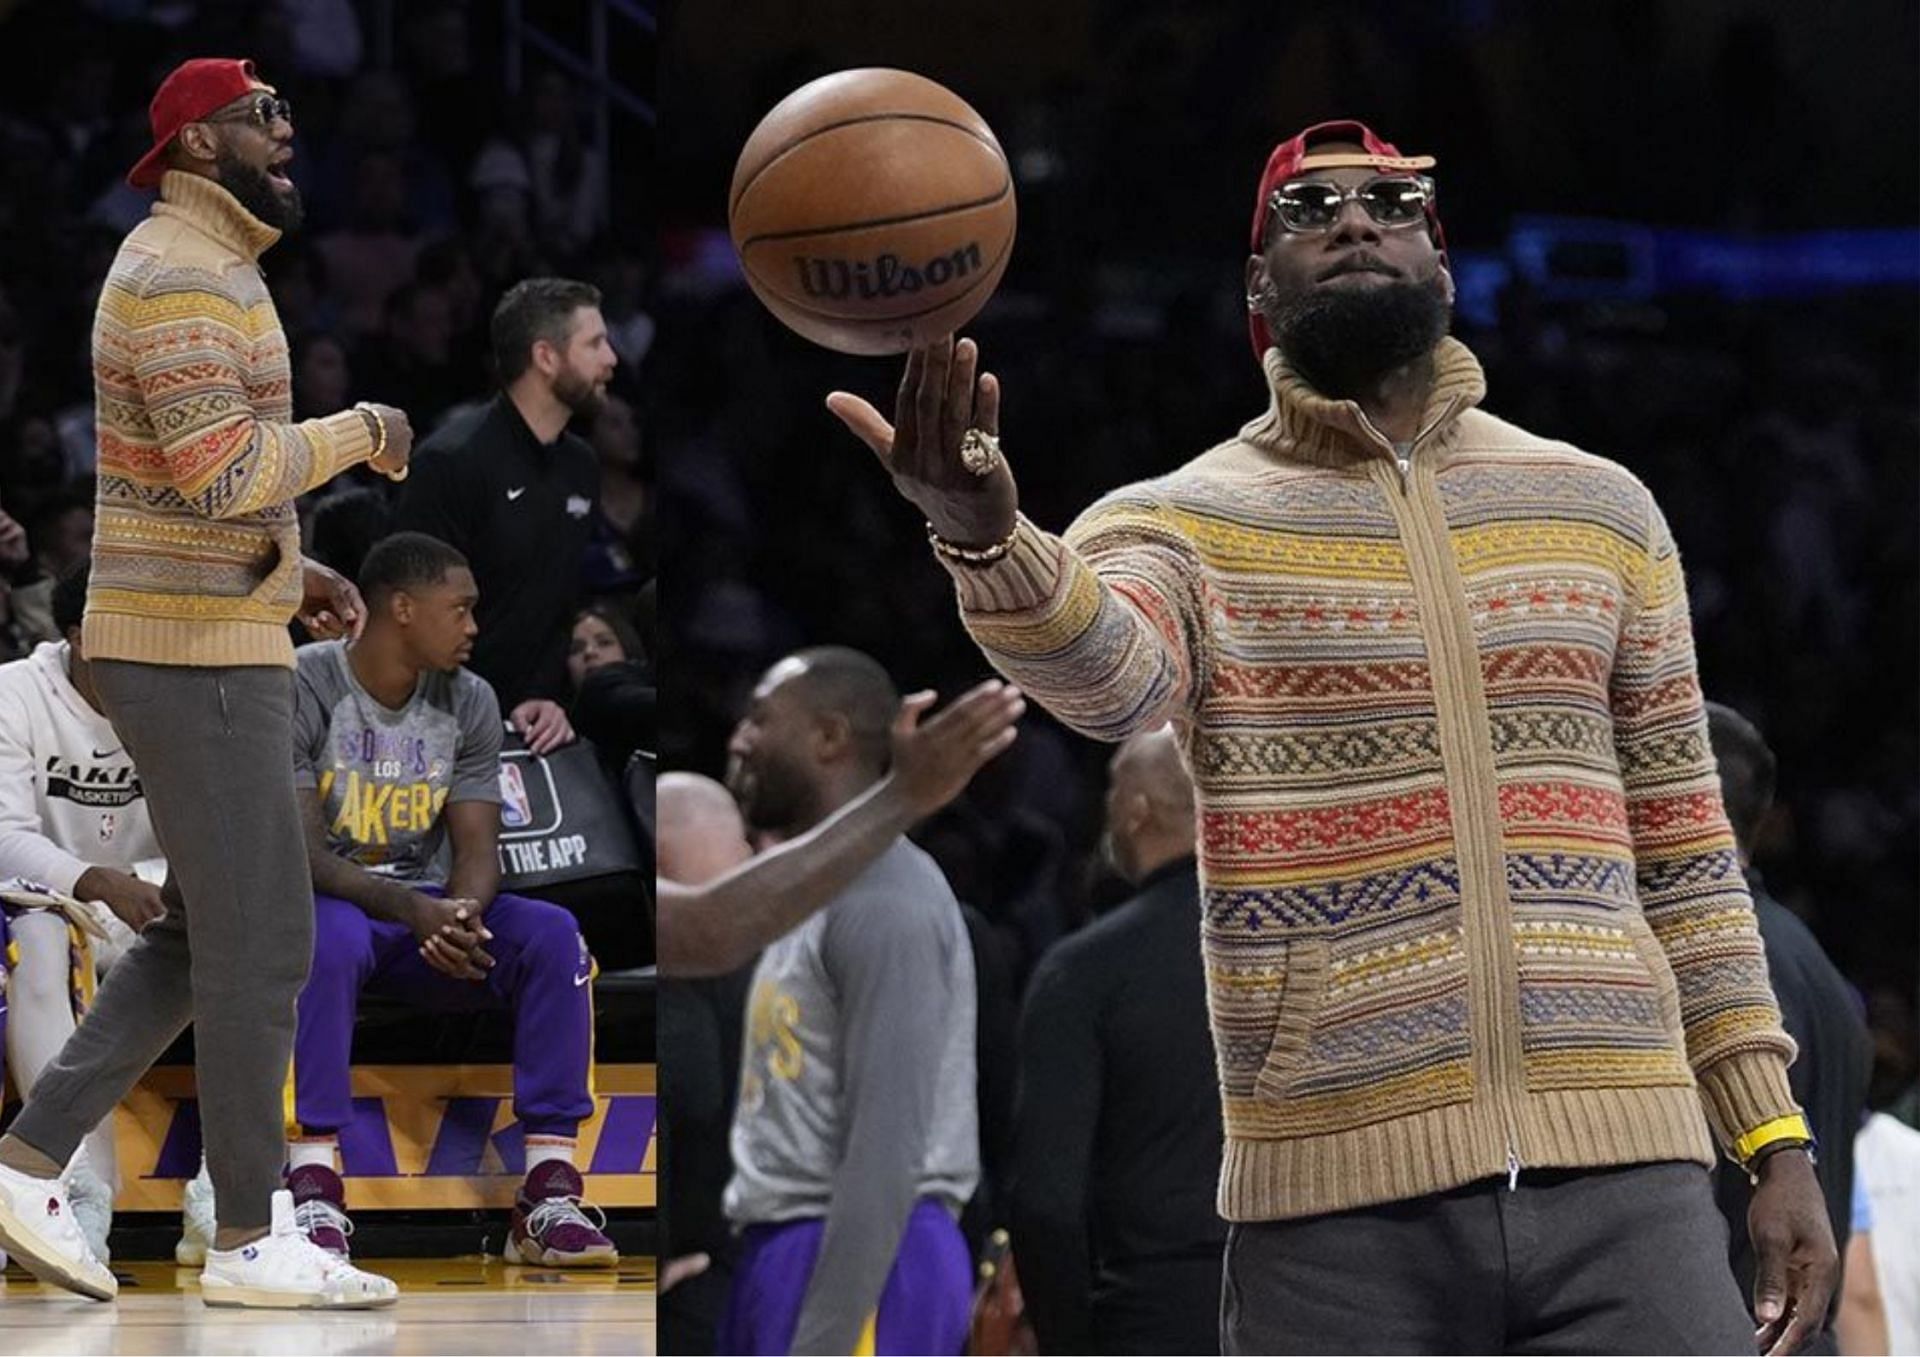 LeBron James watched the LA Lakers versus New York Knicks game without a walking boot. [photo: SPIN.ph]